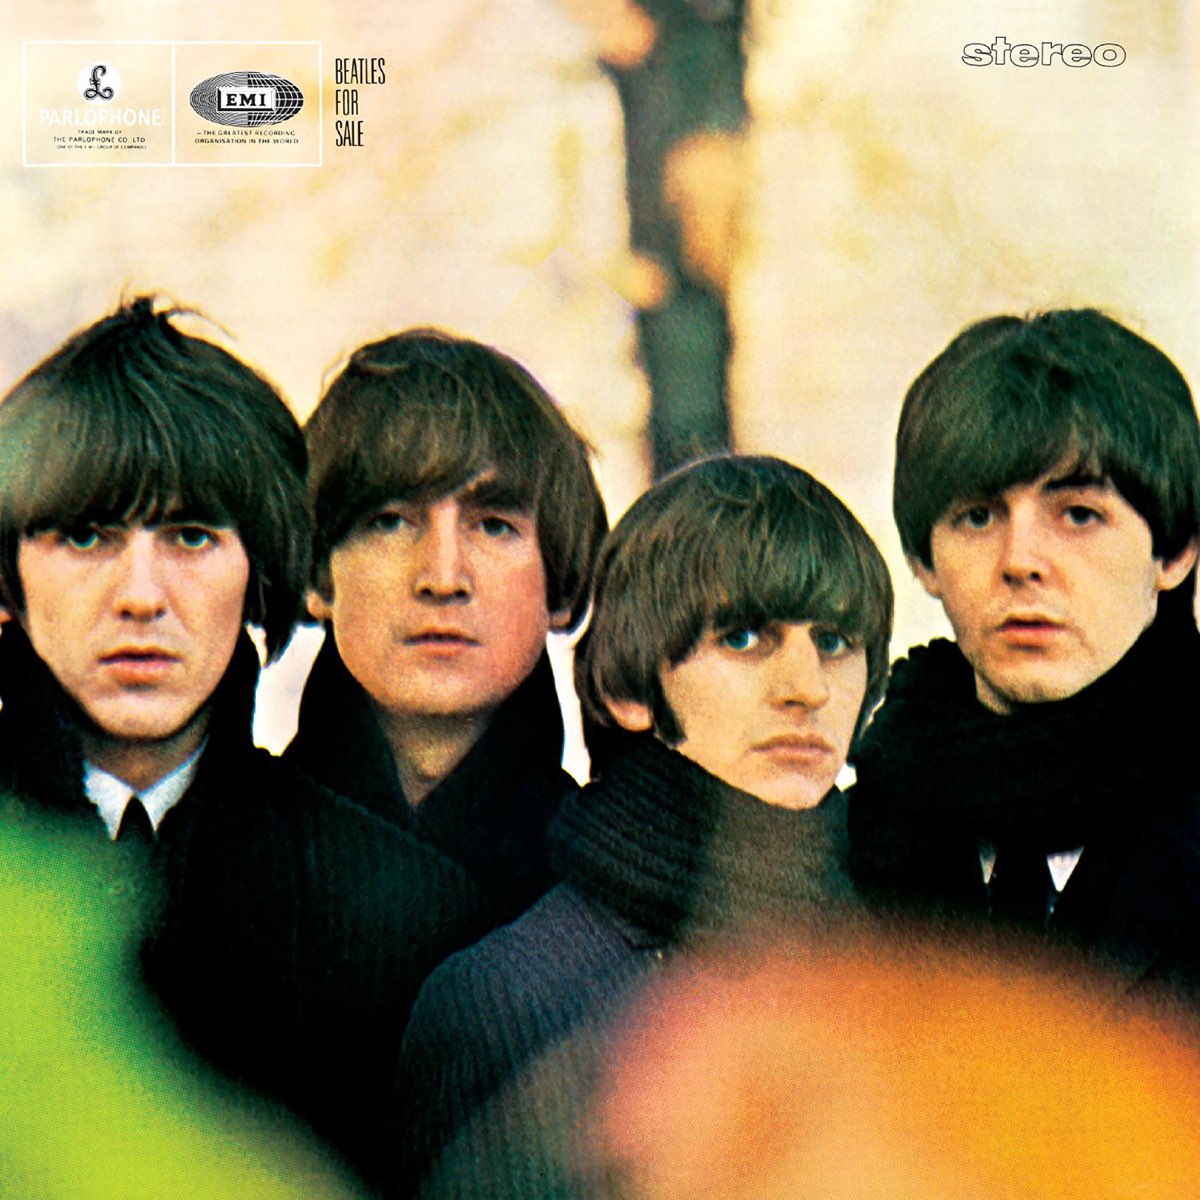 The Beatles Beatles for Sale cover artwork